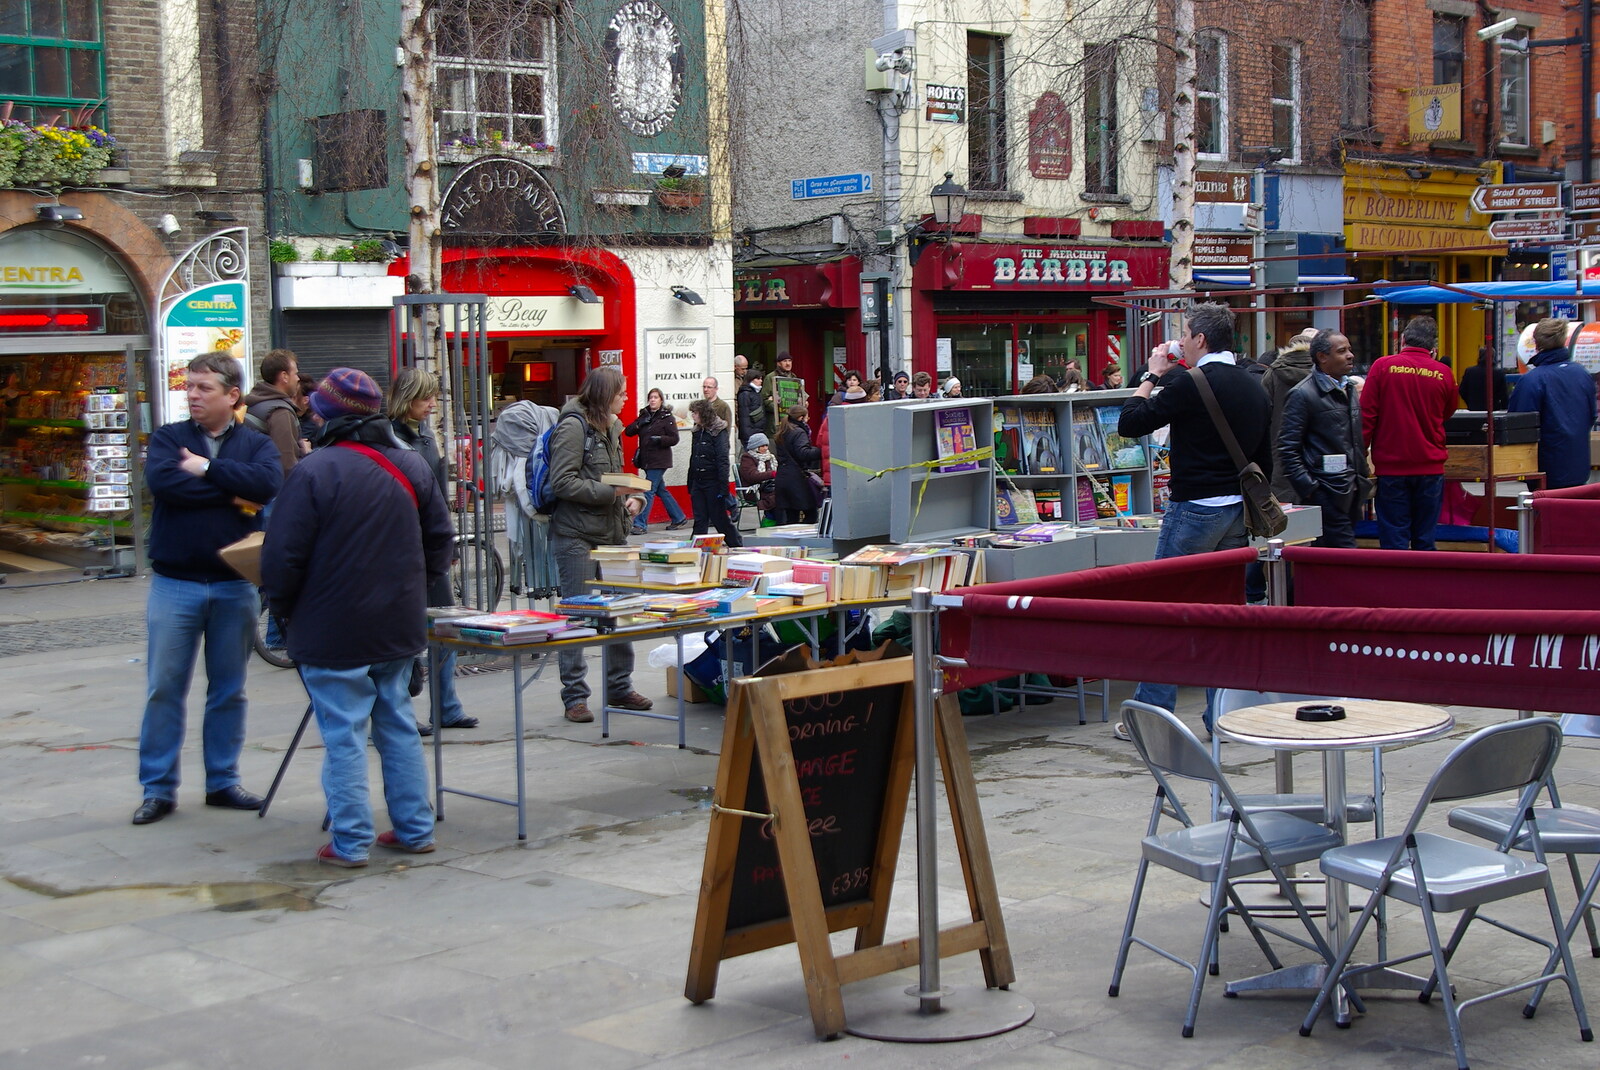 Easter in Dublin, Ireland - 21st March 2008: An outdoor book sale in Temple Bar